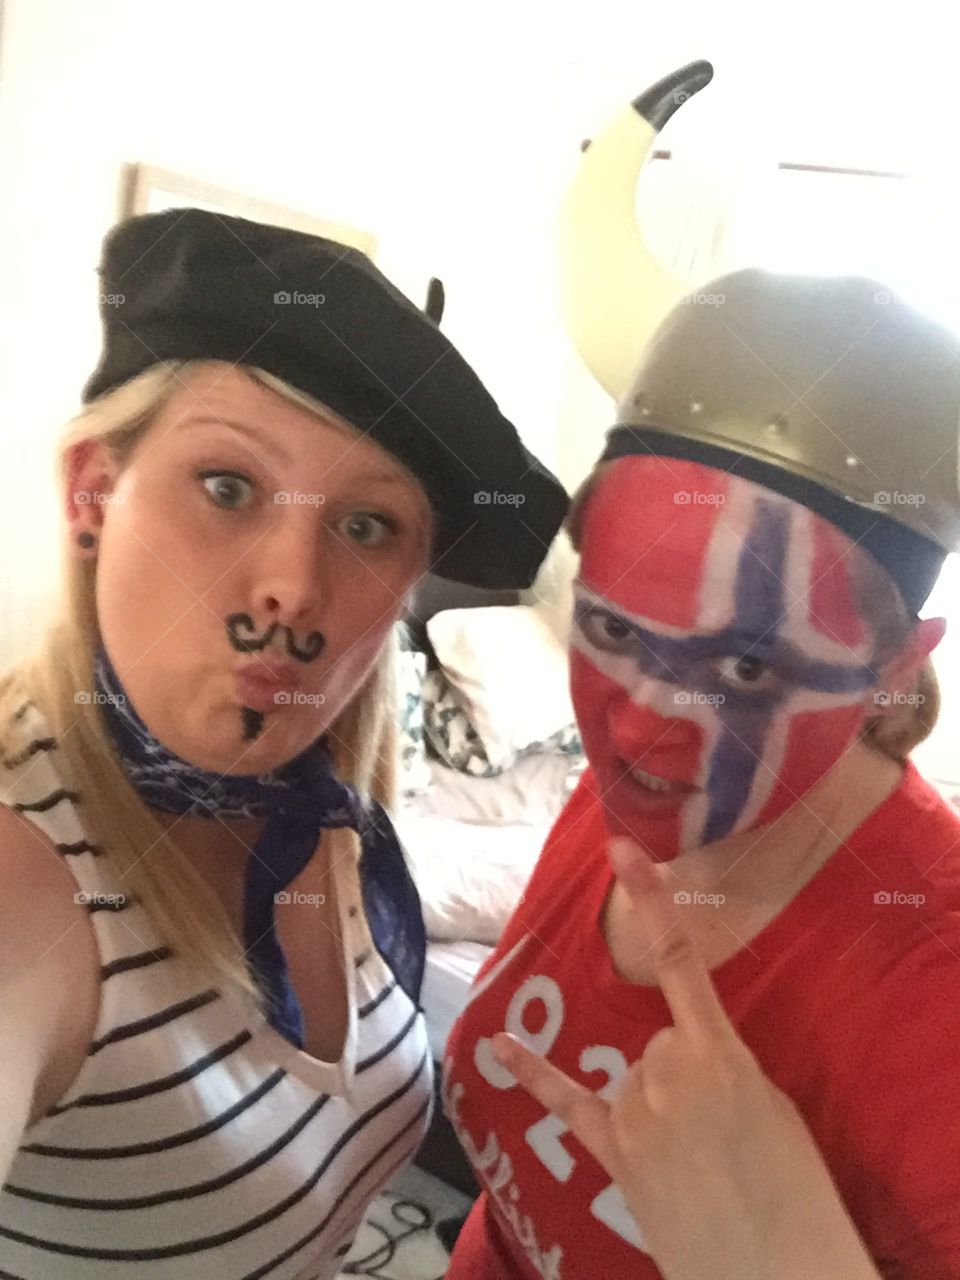 Eurovision 2016 dress as your chosen country Norway and France in caption 😊